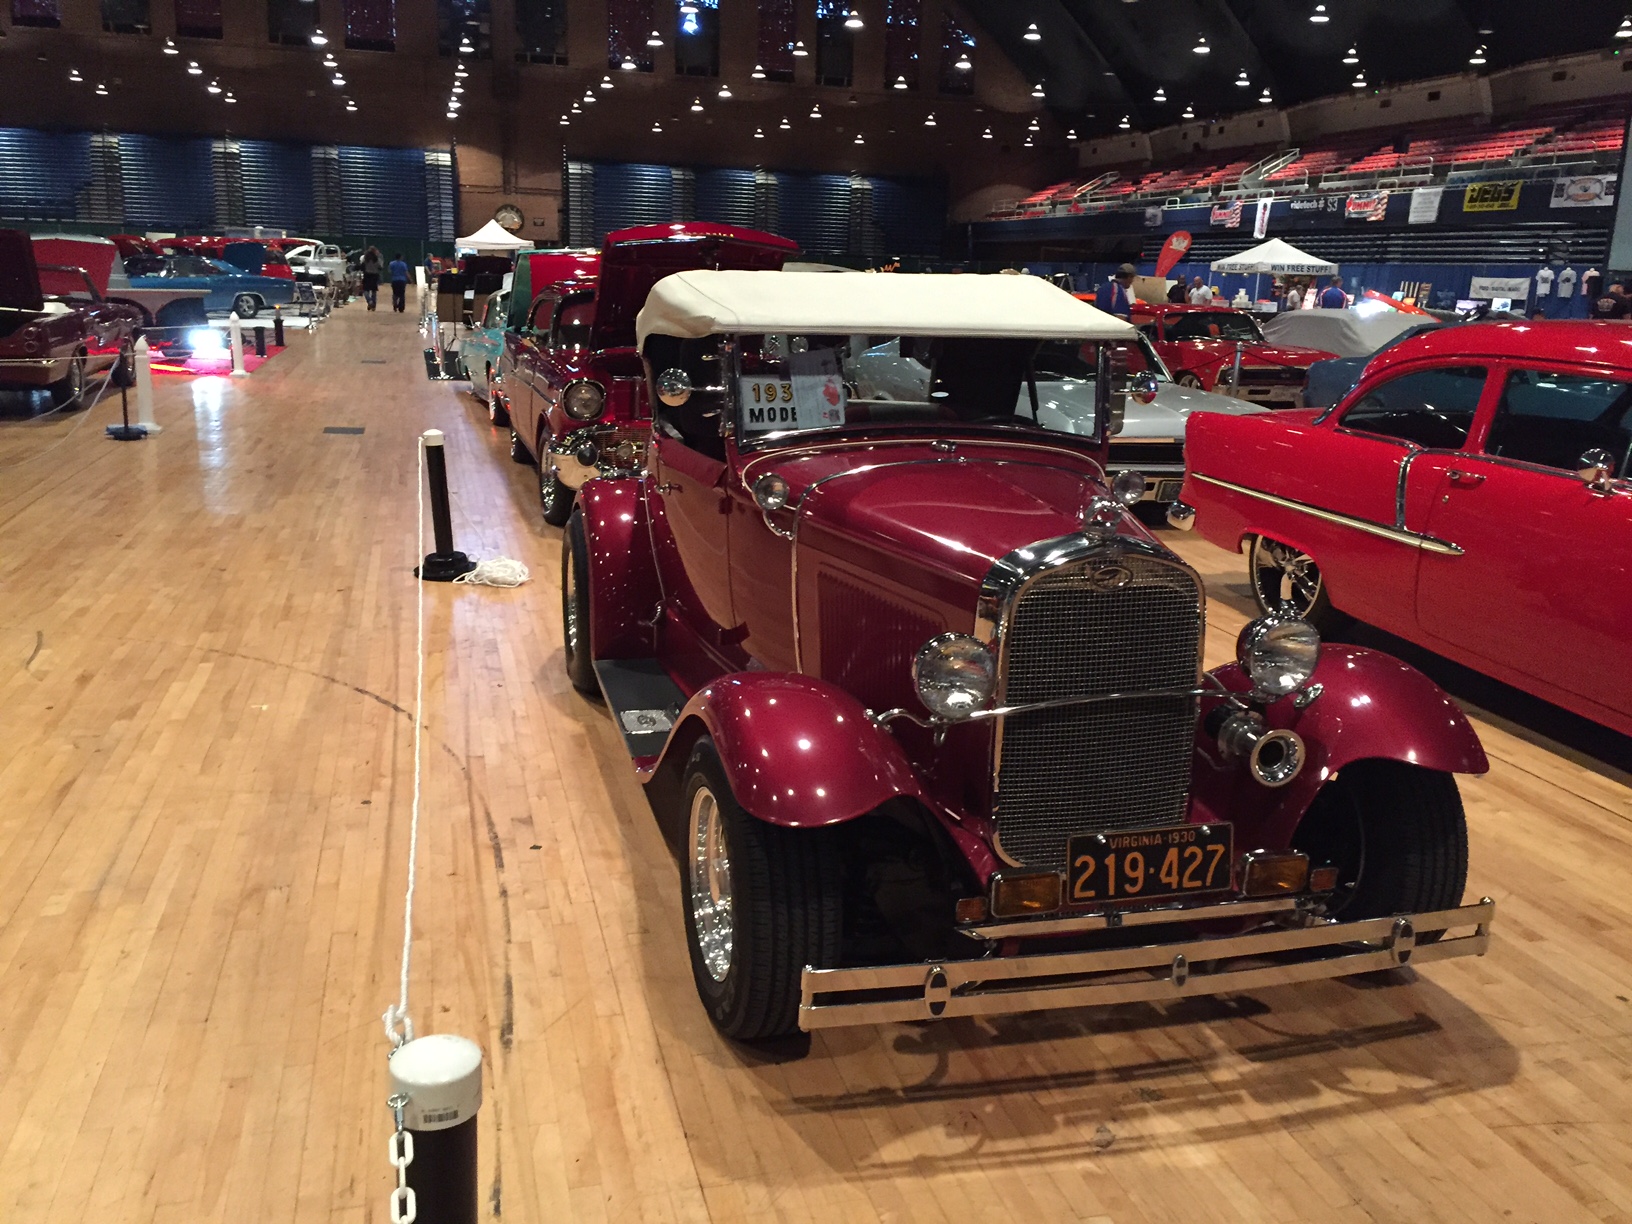 The annual D.C. show is more about just the art that goes into cars that span about 50 years, from the 1930s through the 1980s. The club honors a part of the U.S. military each year. (WTOP/Rich Johnson)